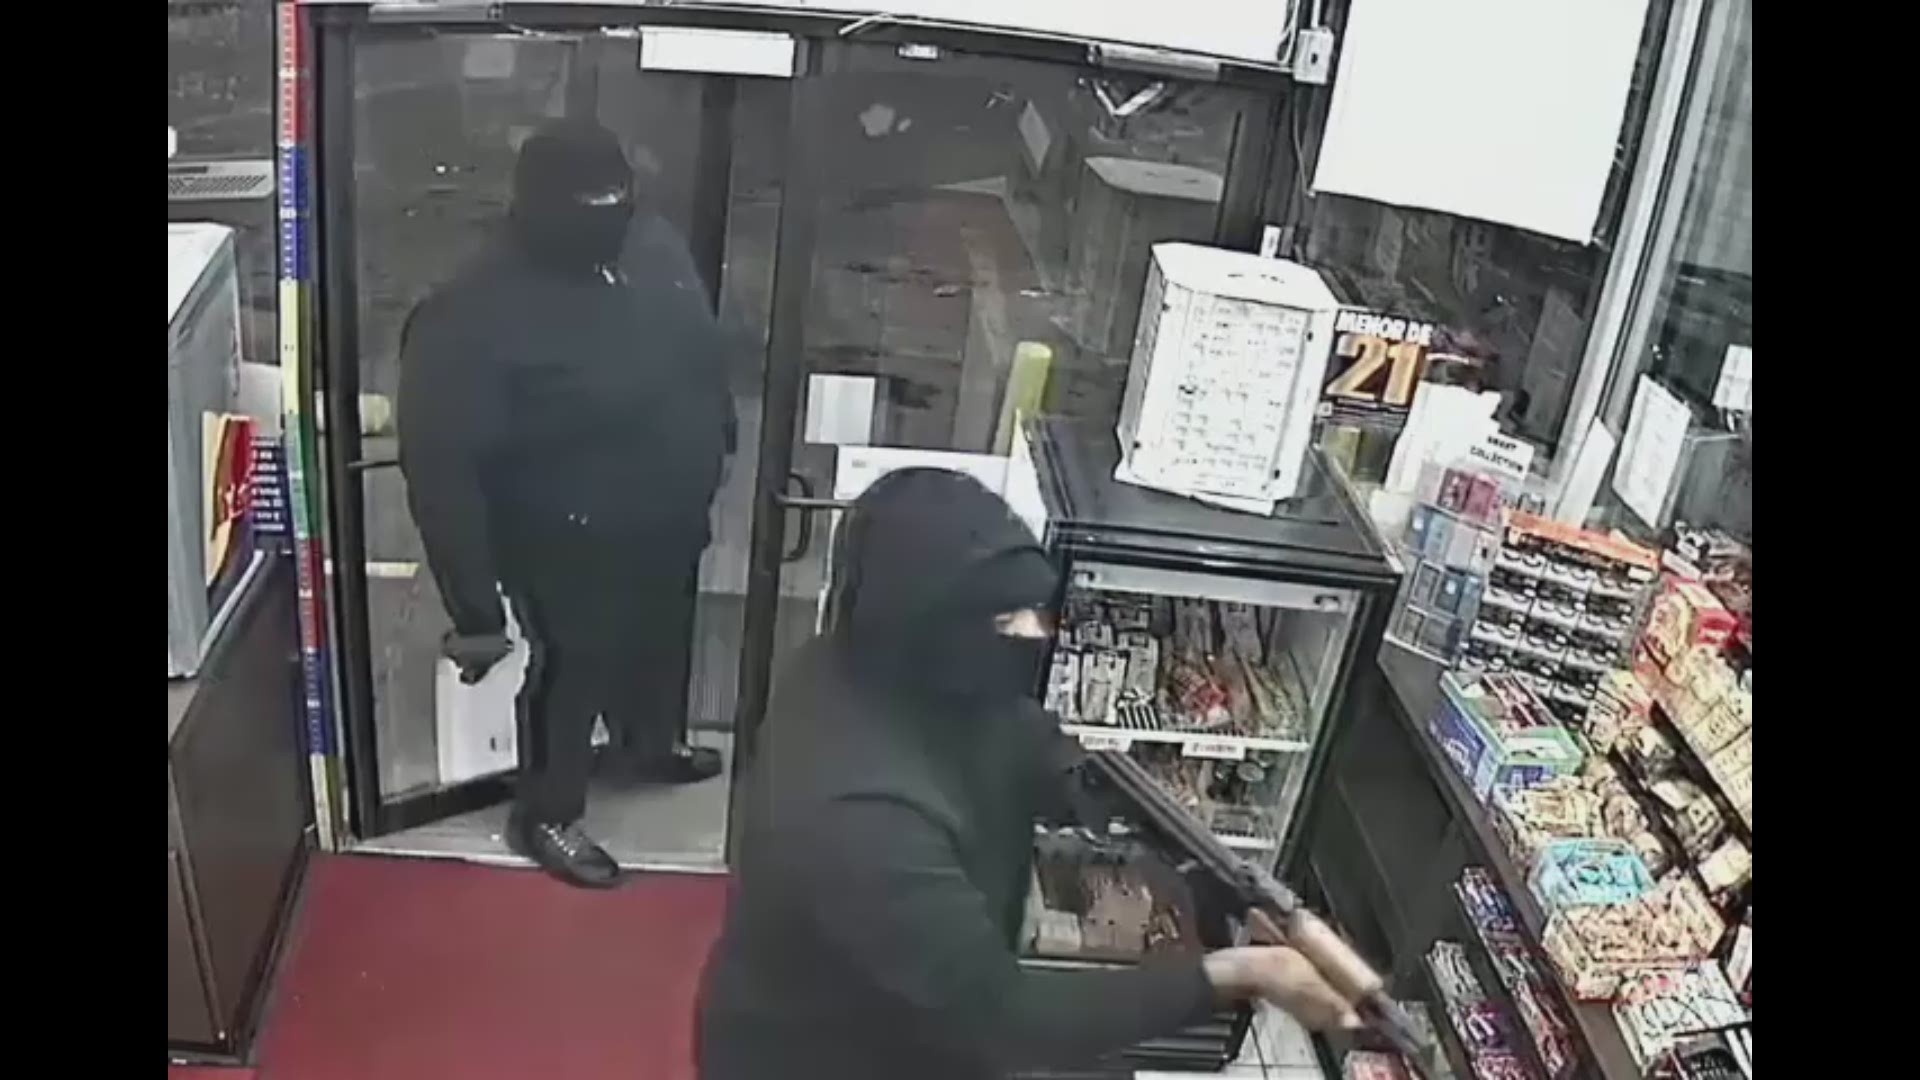 This video is from January 8 at the Sunmart Gulf at 3300 Yellowstone.  Two guys came in with weapons, one robbing the clerk at gunpoint.